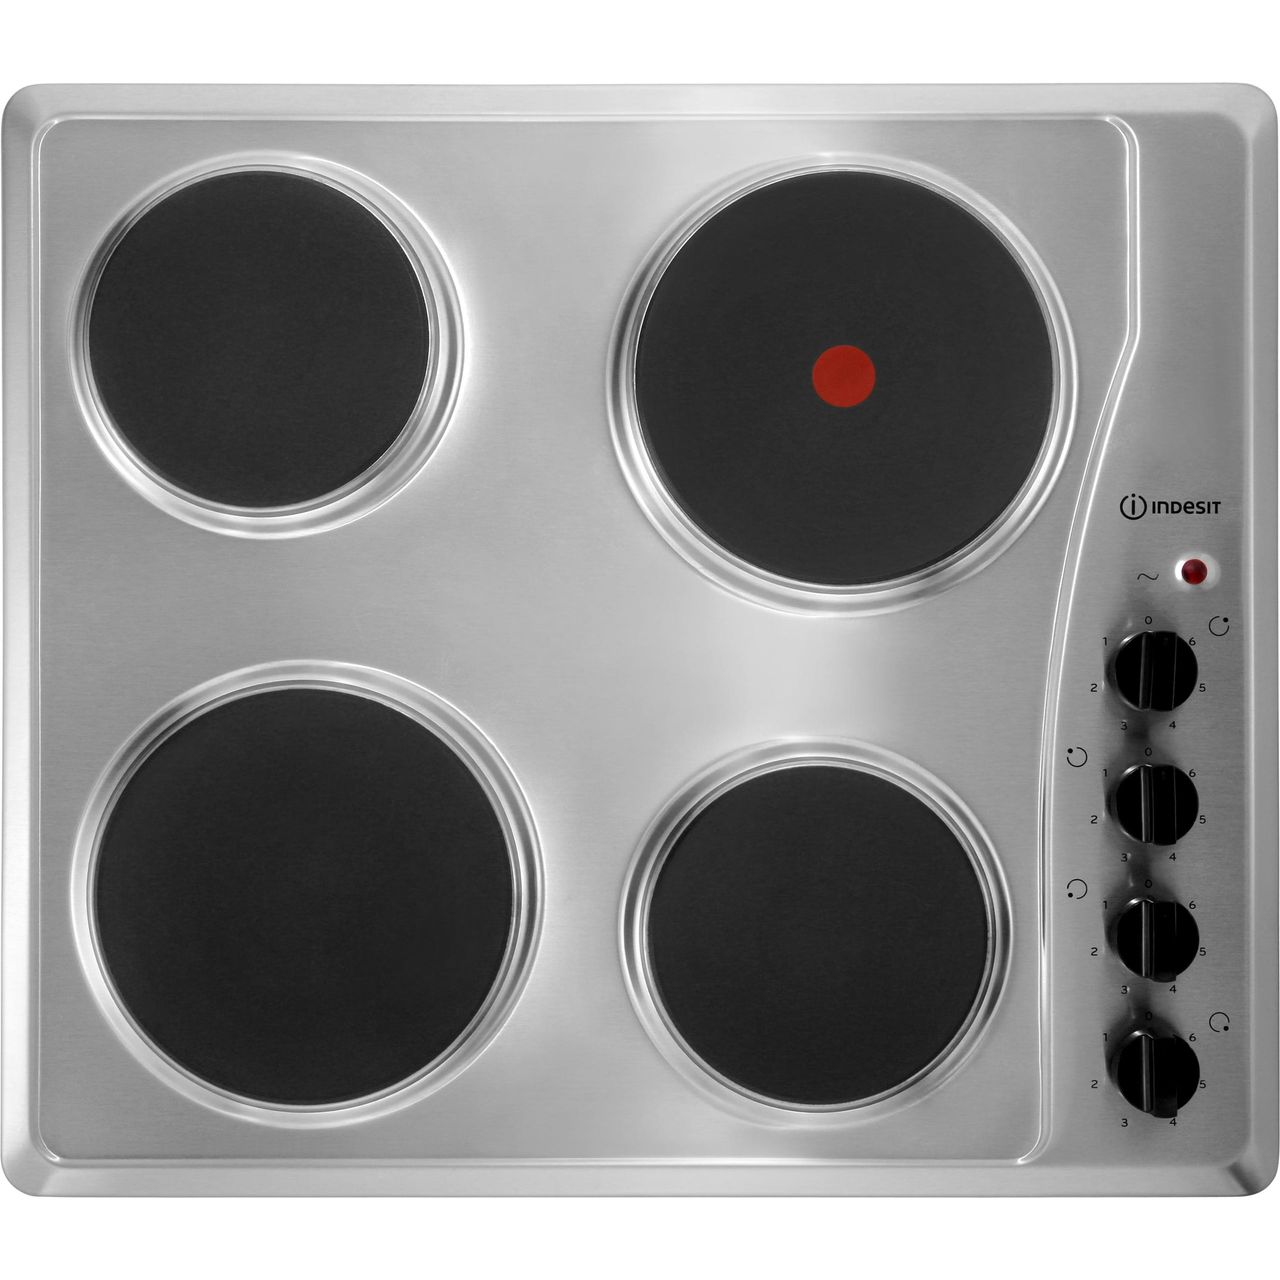 Indesit TI60X 58cm Solid Plate Hob Review